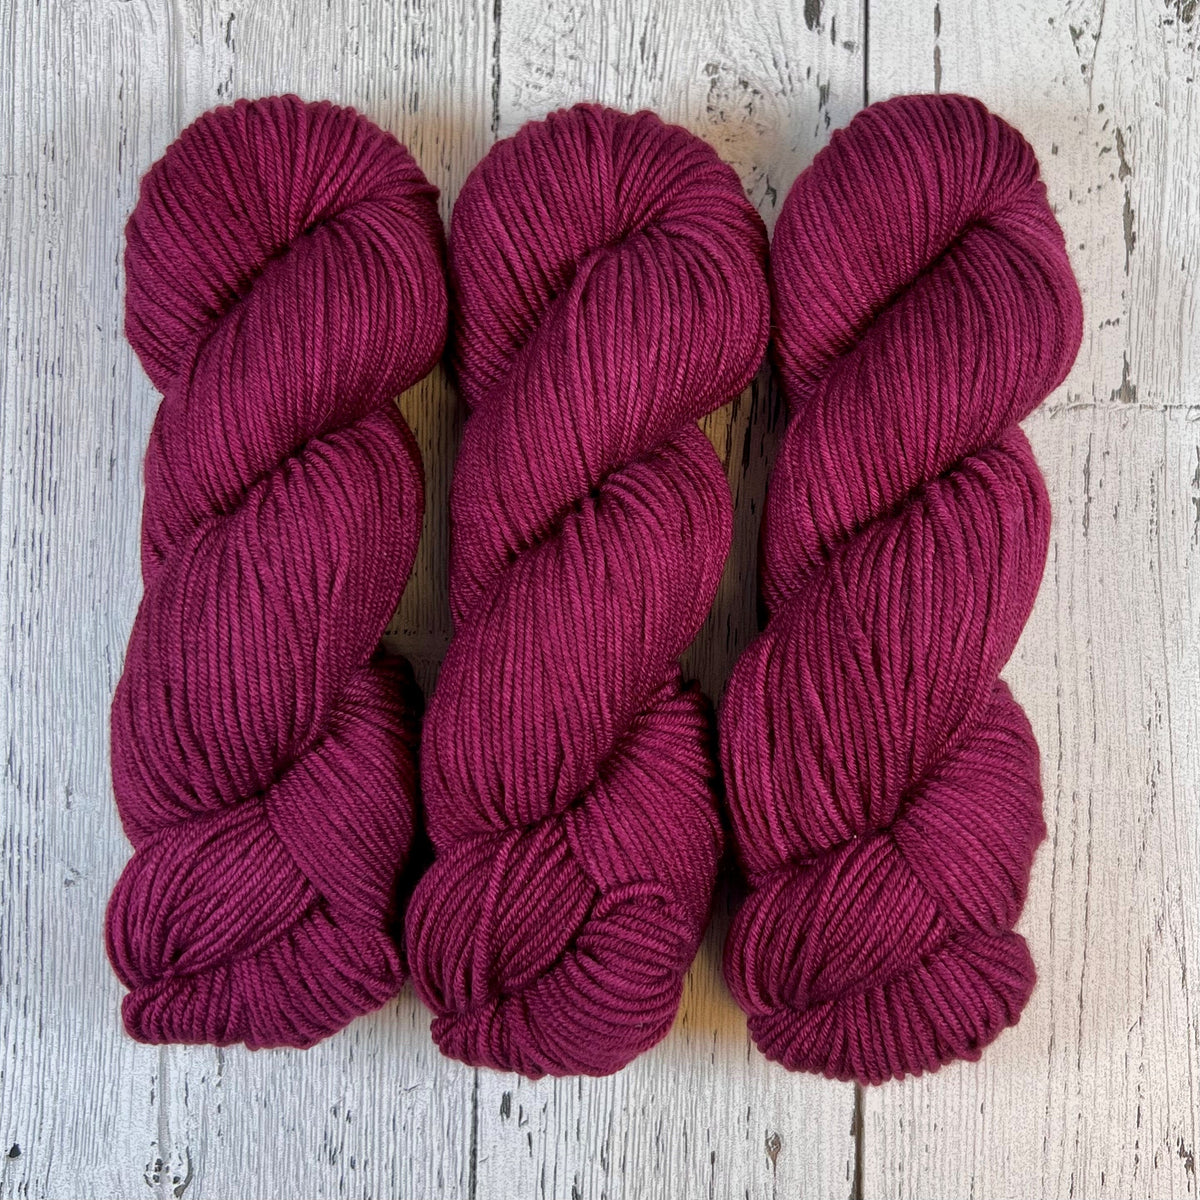 Contented Grapes - Fioritura Worsted